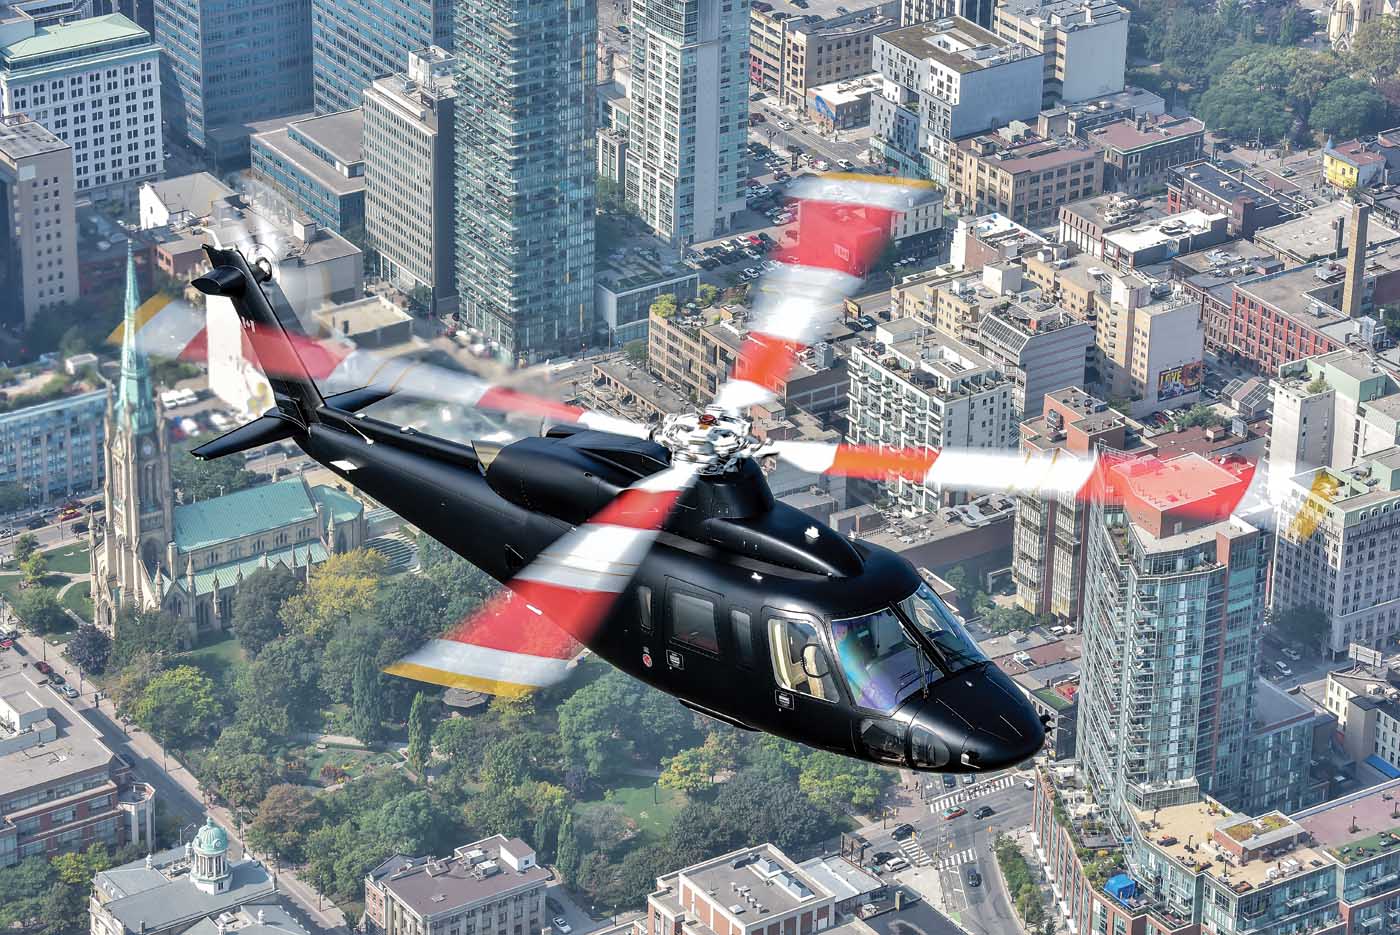 The twin-engine Sikorsky S-76D introduced cutting edge technology, including a quiet tail rotor and improved main rotor blades for reduced acoustic levels. Mike Reyno Photo